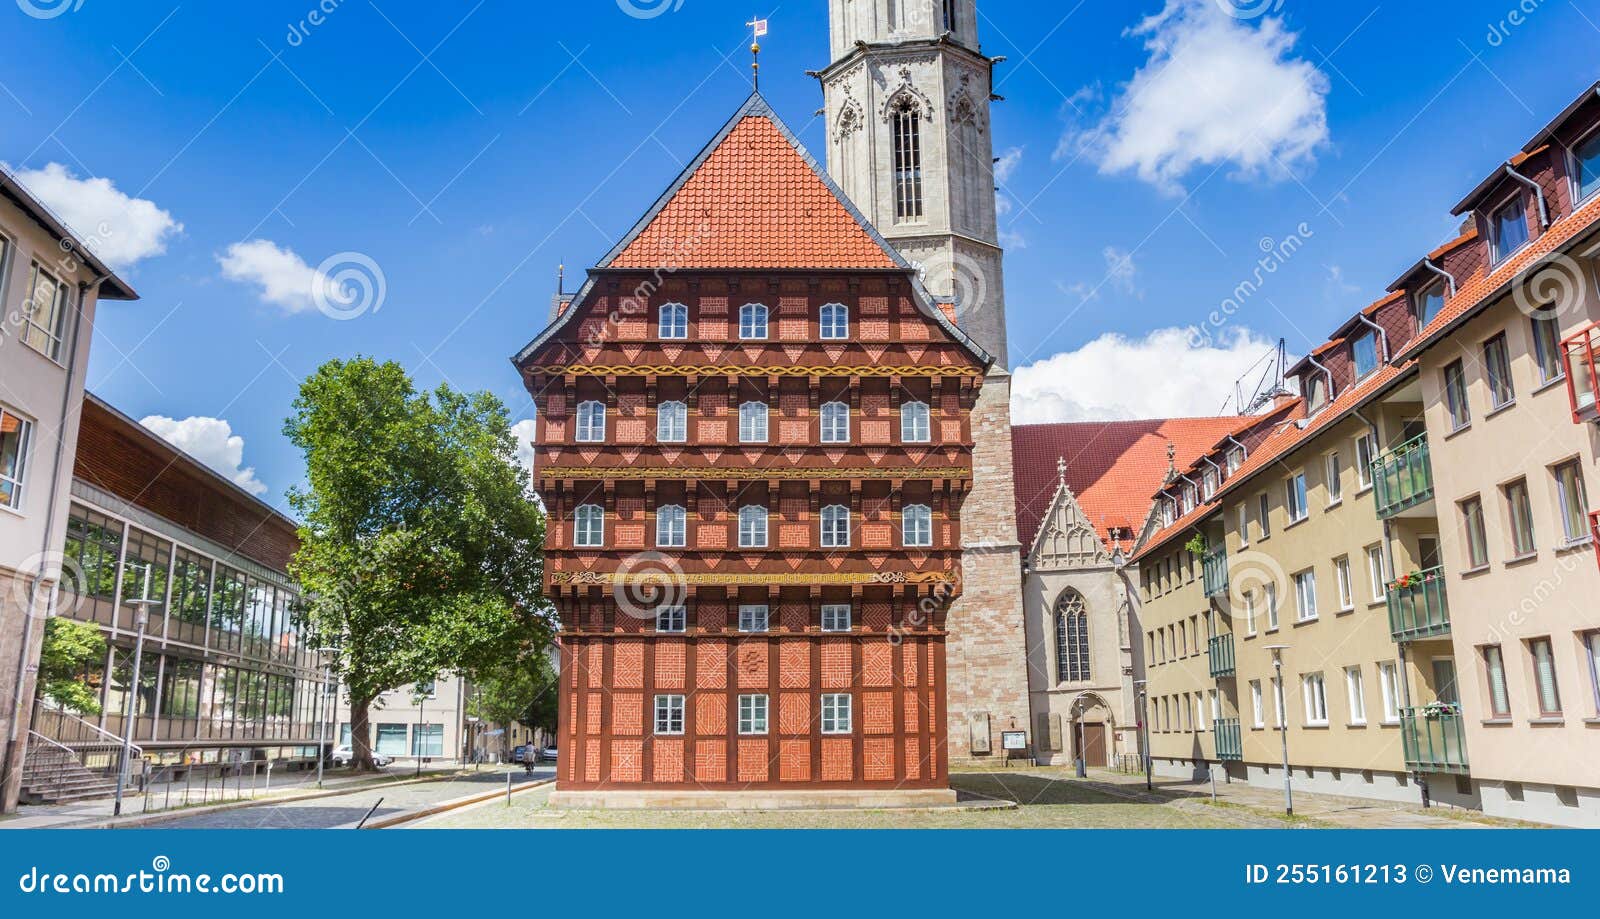 panorama of the historic alte waage building and church tower in braunschweig